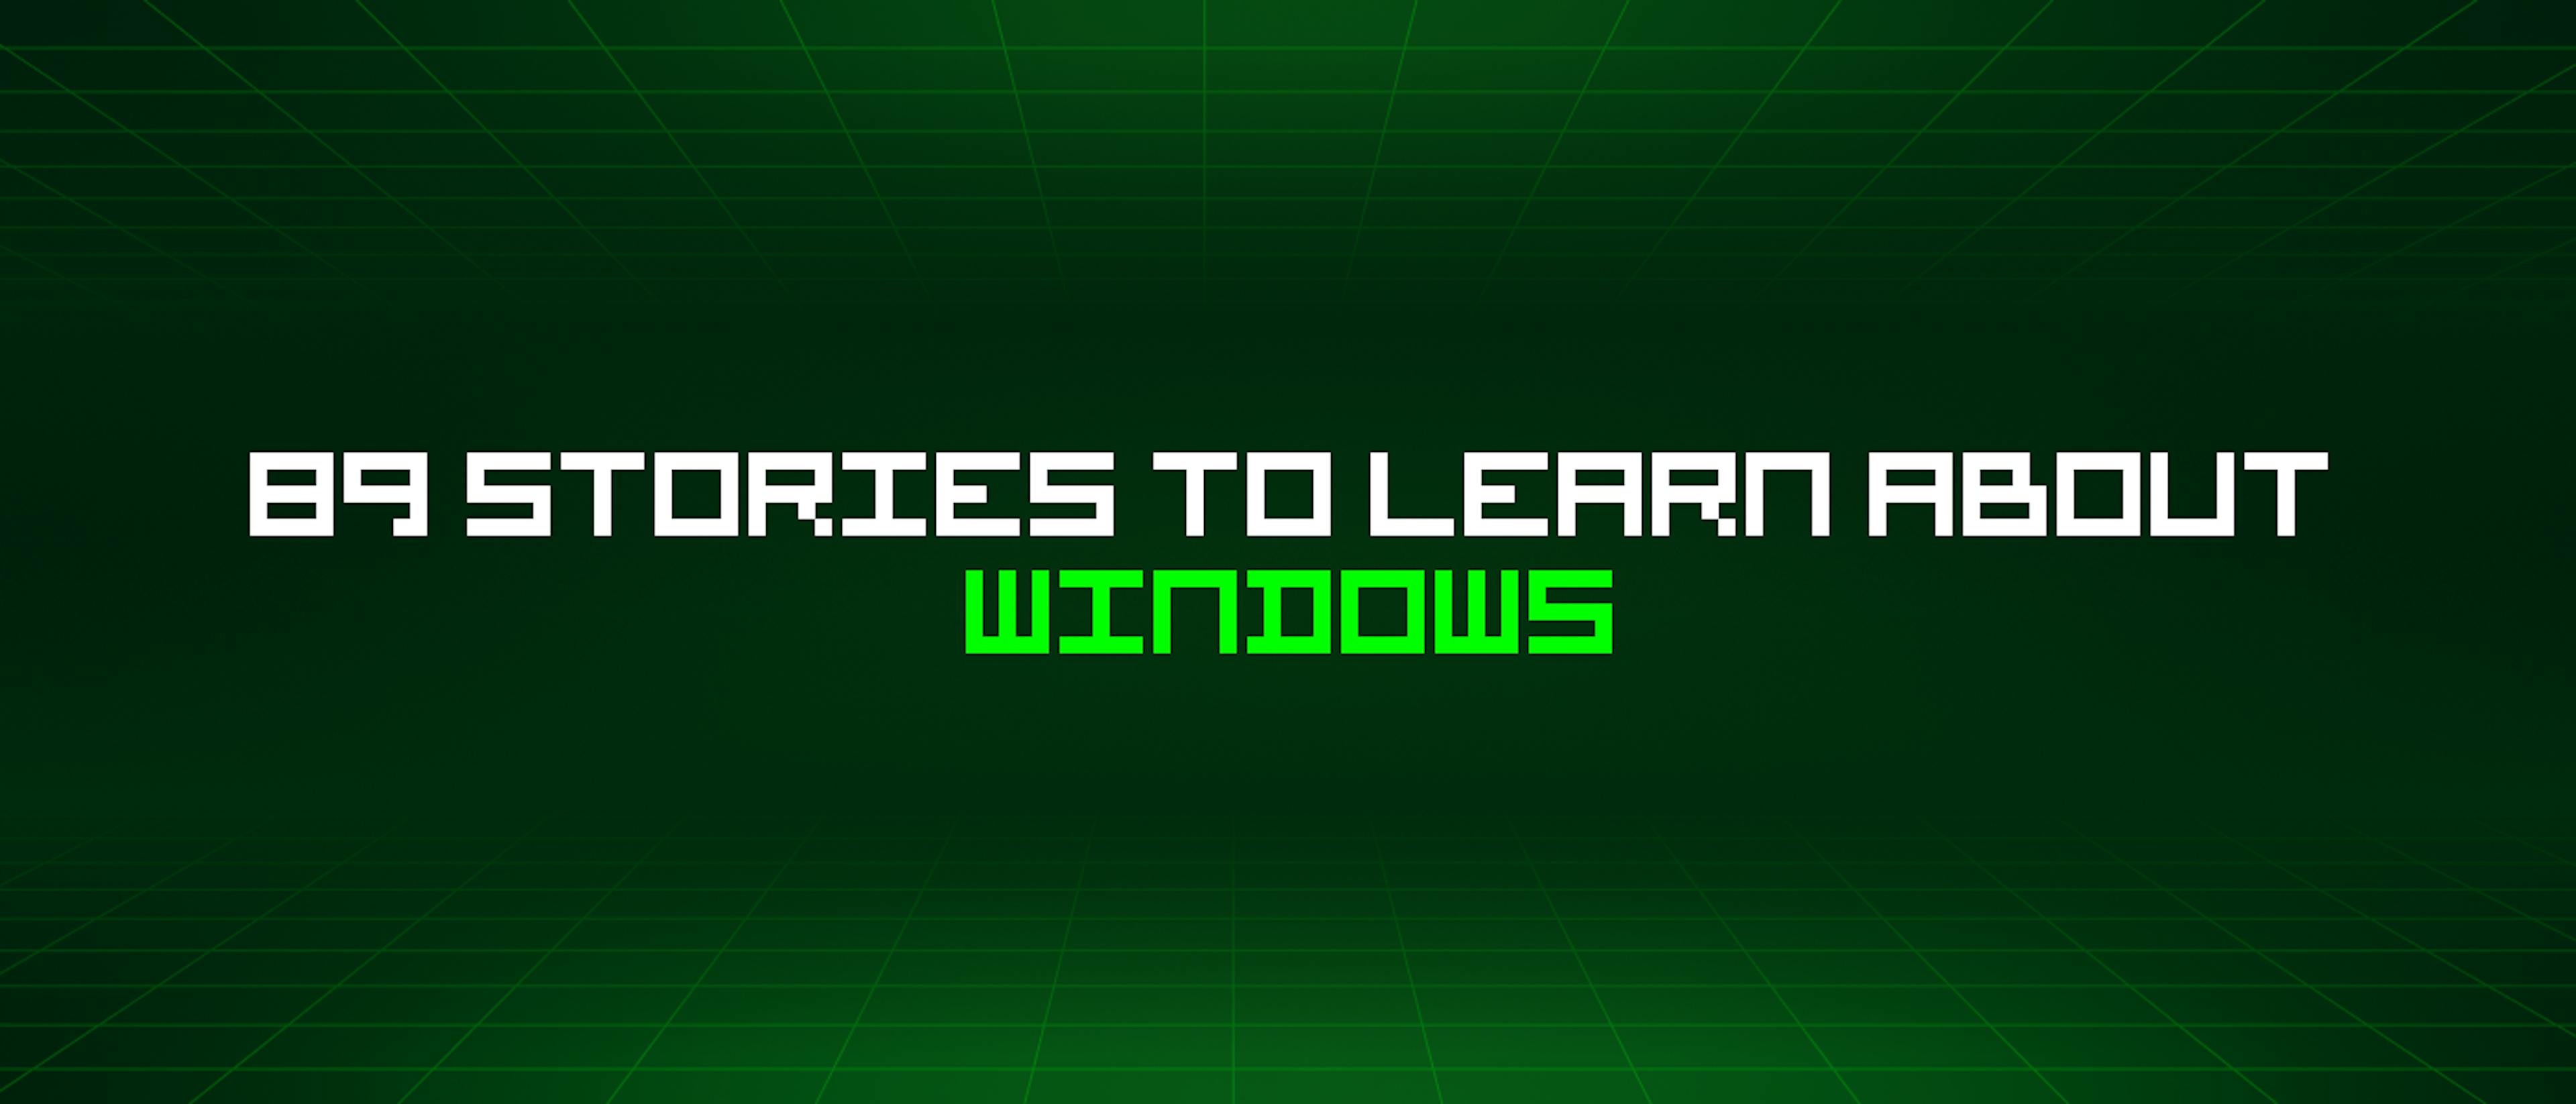 featured image - 89 Stories To Learn About Windows